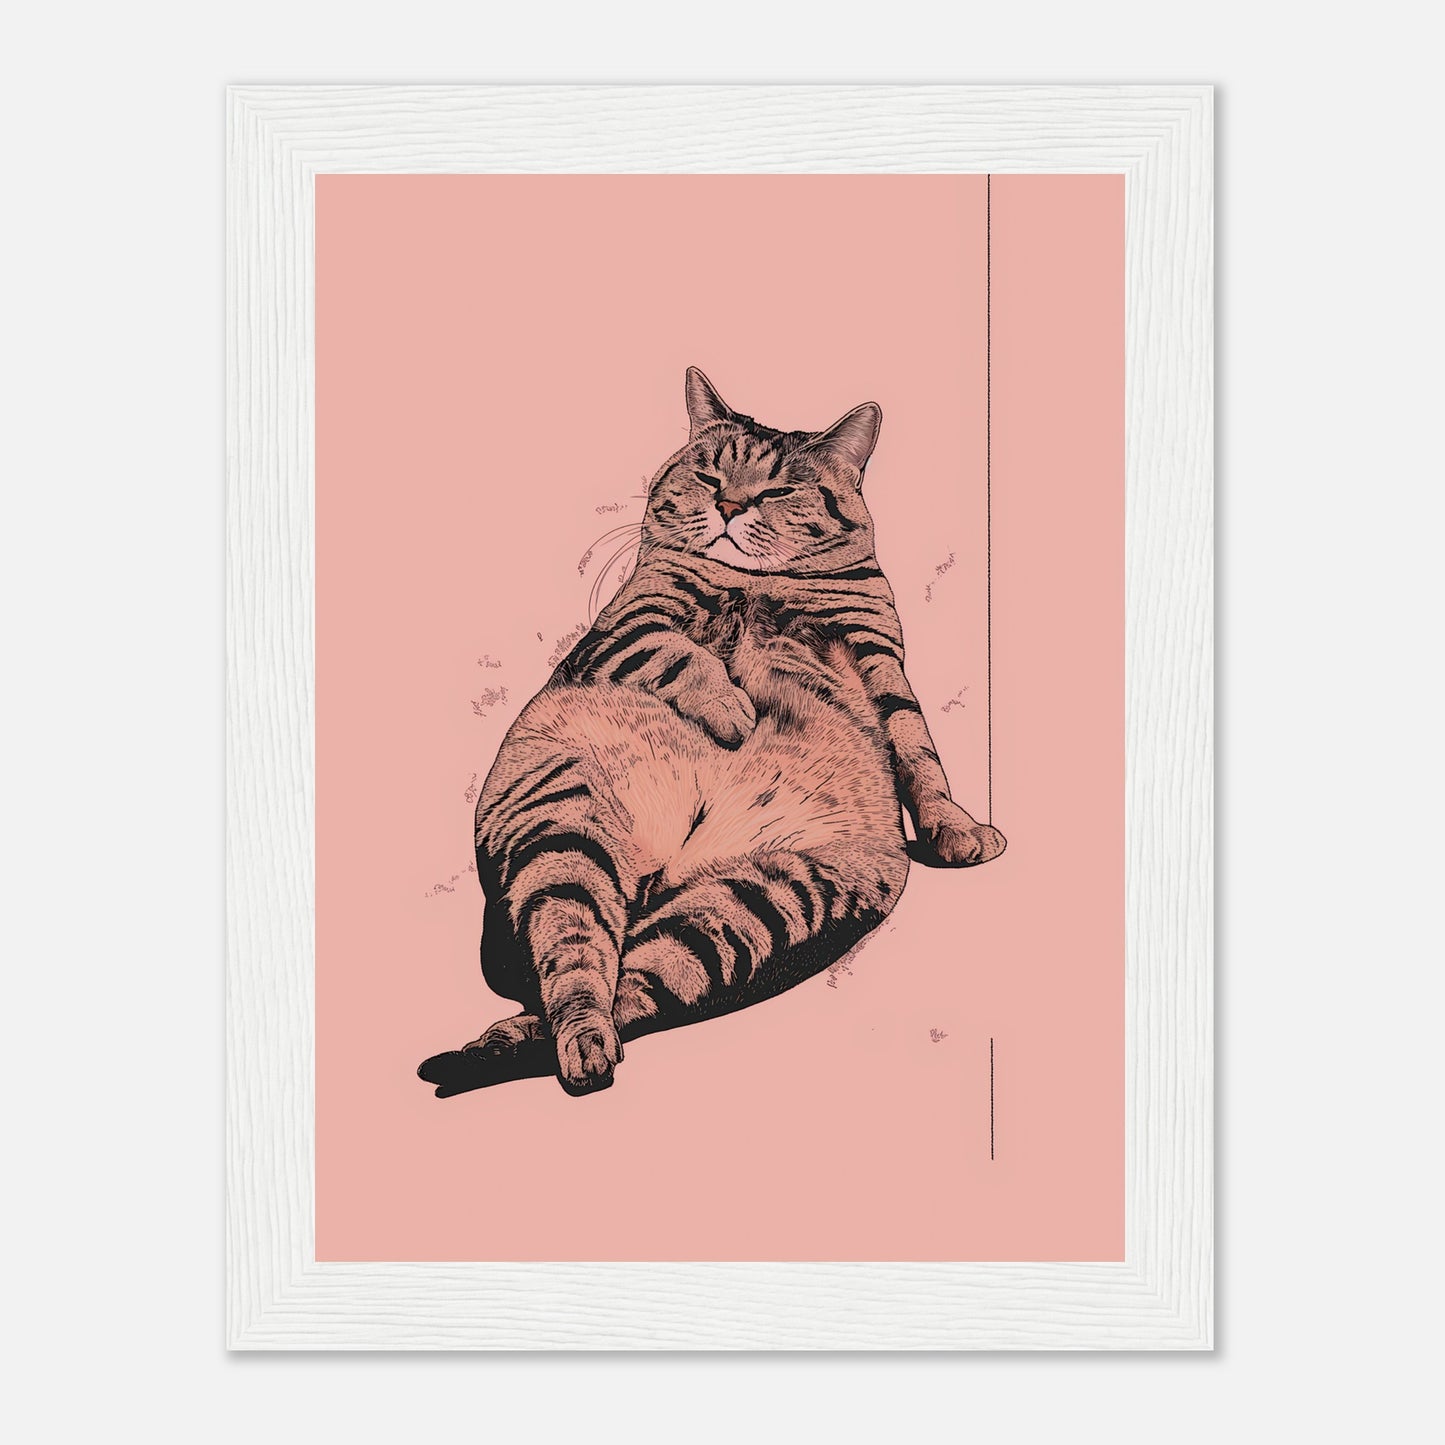 Illustration of a content cat lounging against a pink background, framed on a wall.